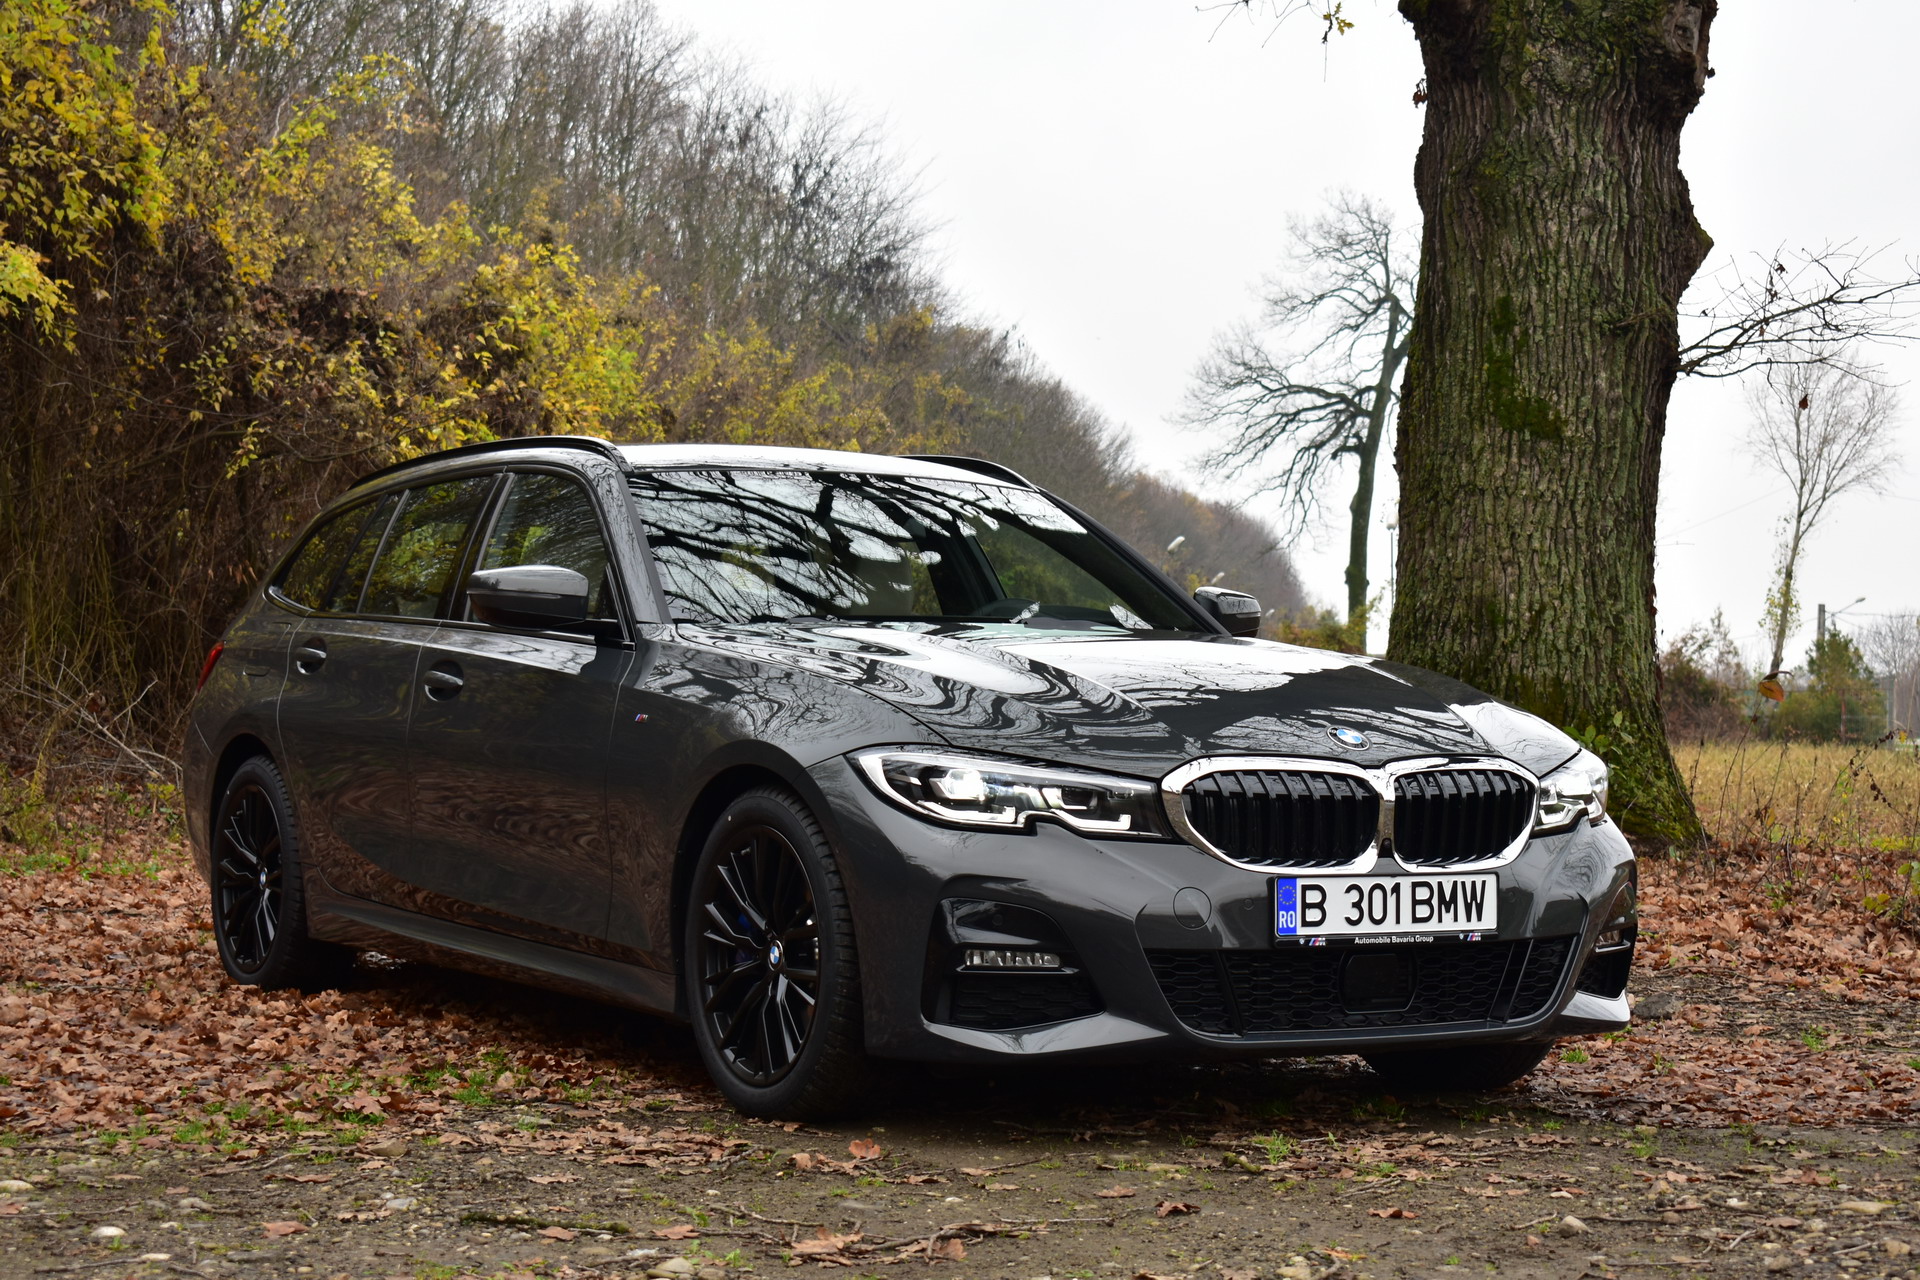 TEST DRIVE: BMW 3 Series Touring (G21) - The perfect everyday companion